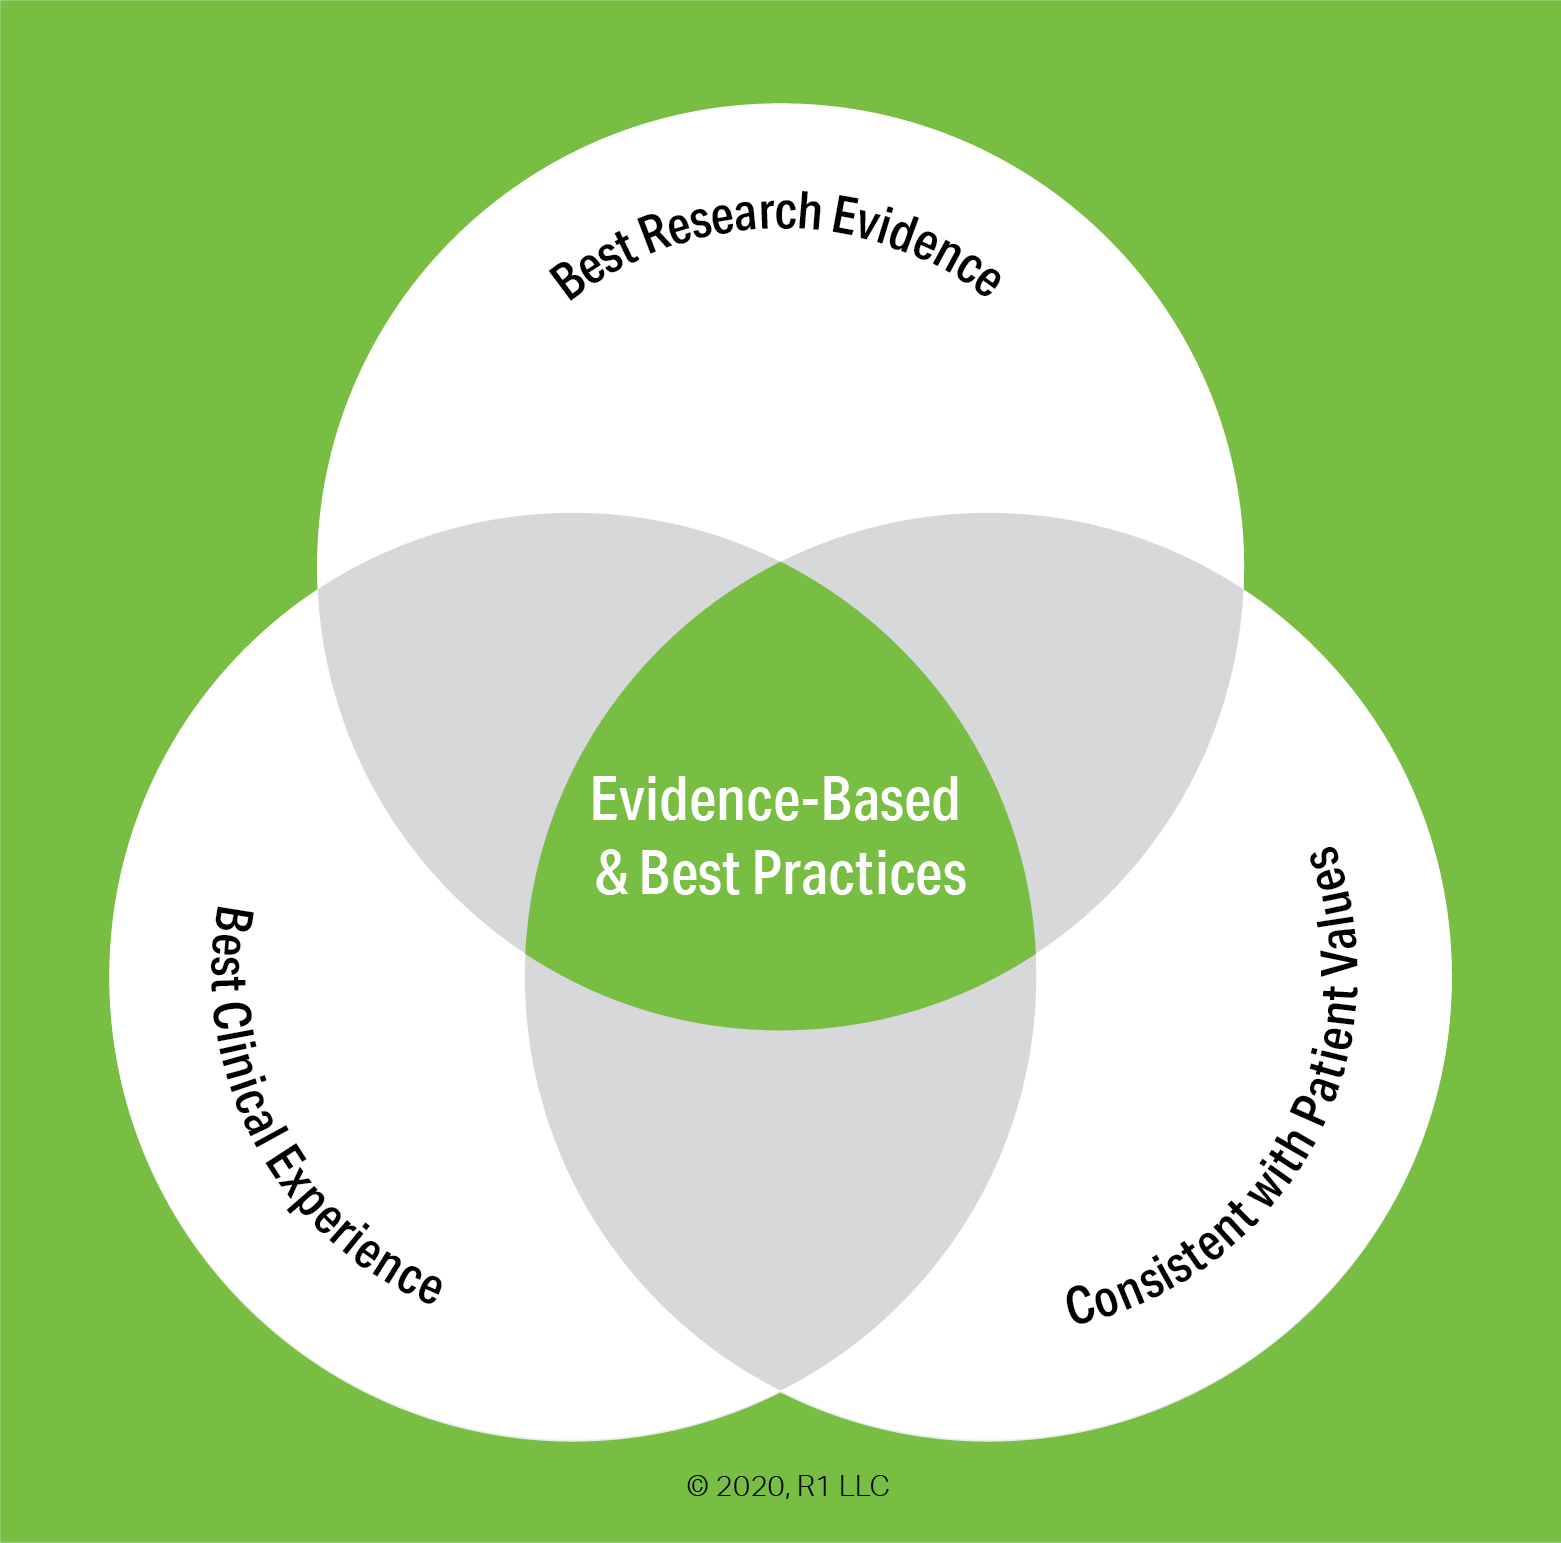 Upon What Evidence Are 'EvidenceBased' Practices Based? — R1 Learning